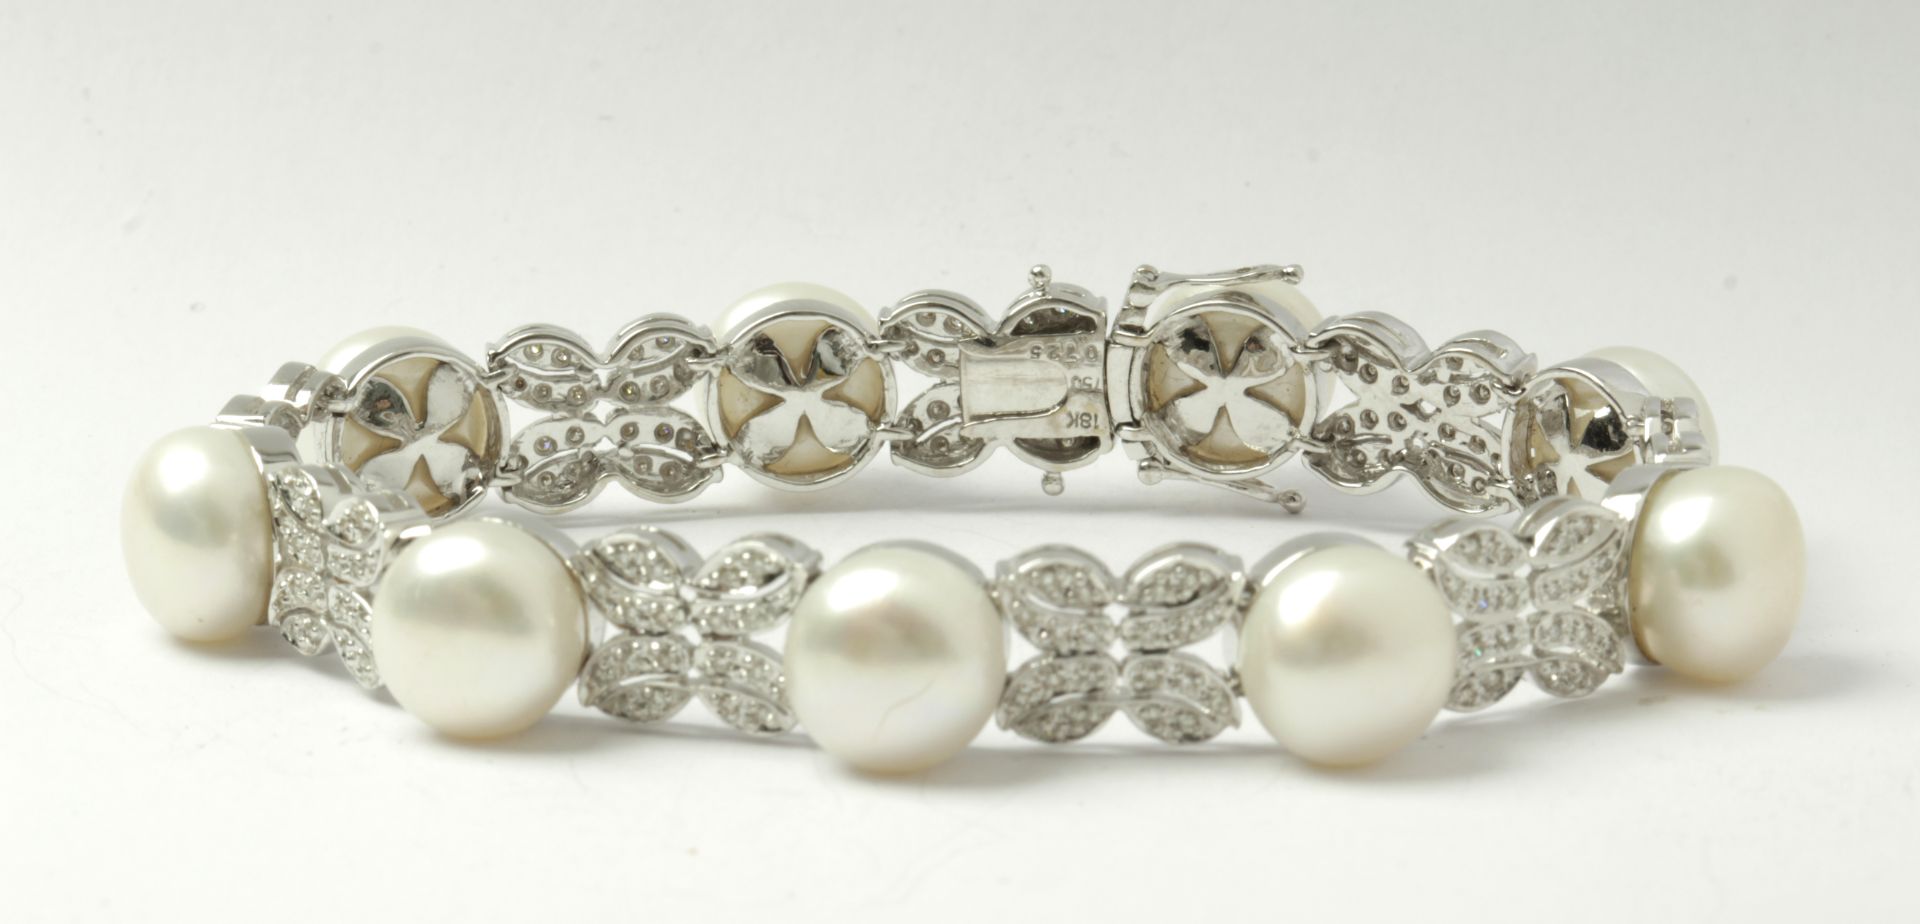 A freshwater pearls, diamonds and 18k. white gold bracelet